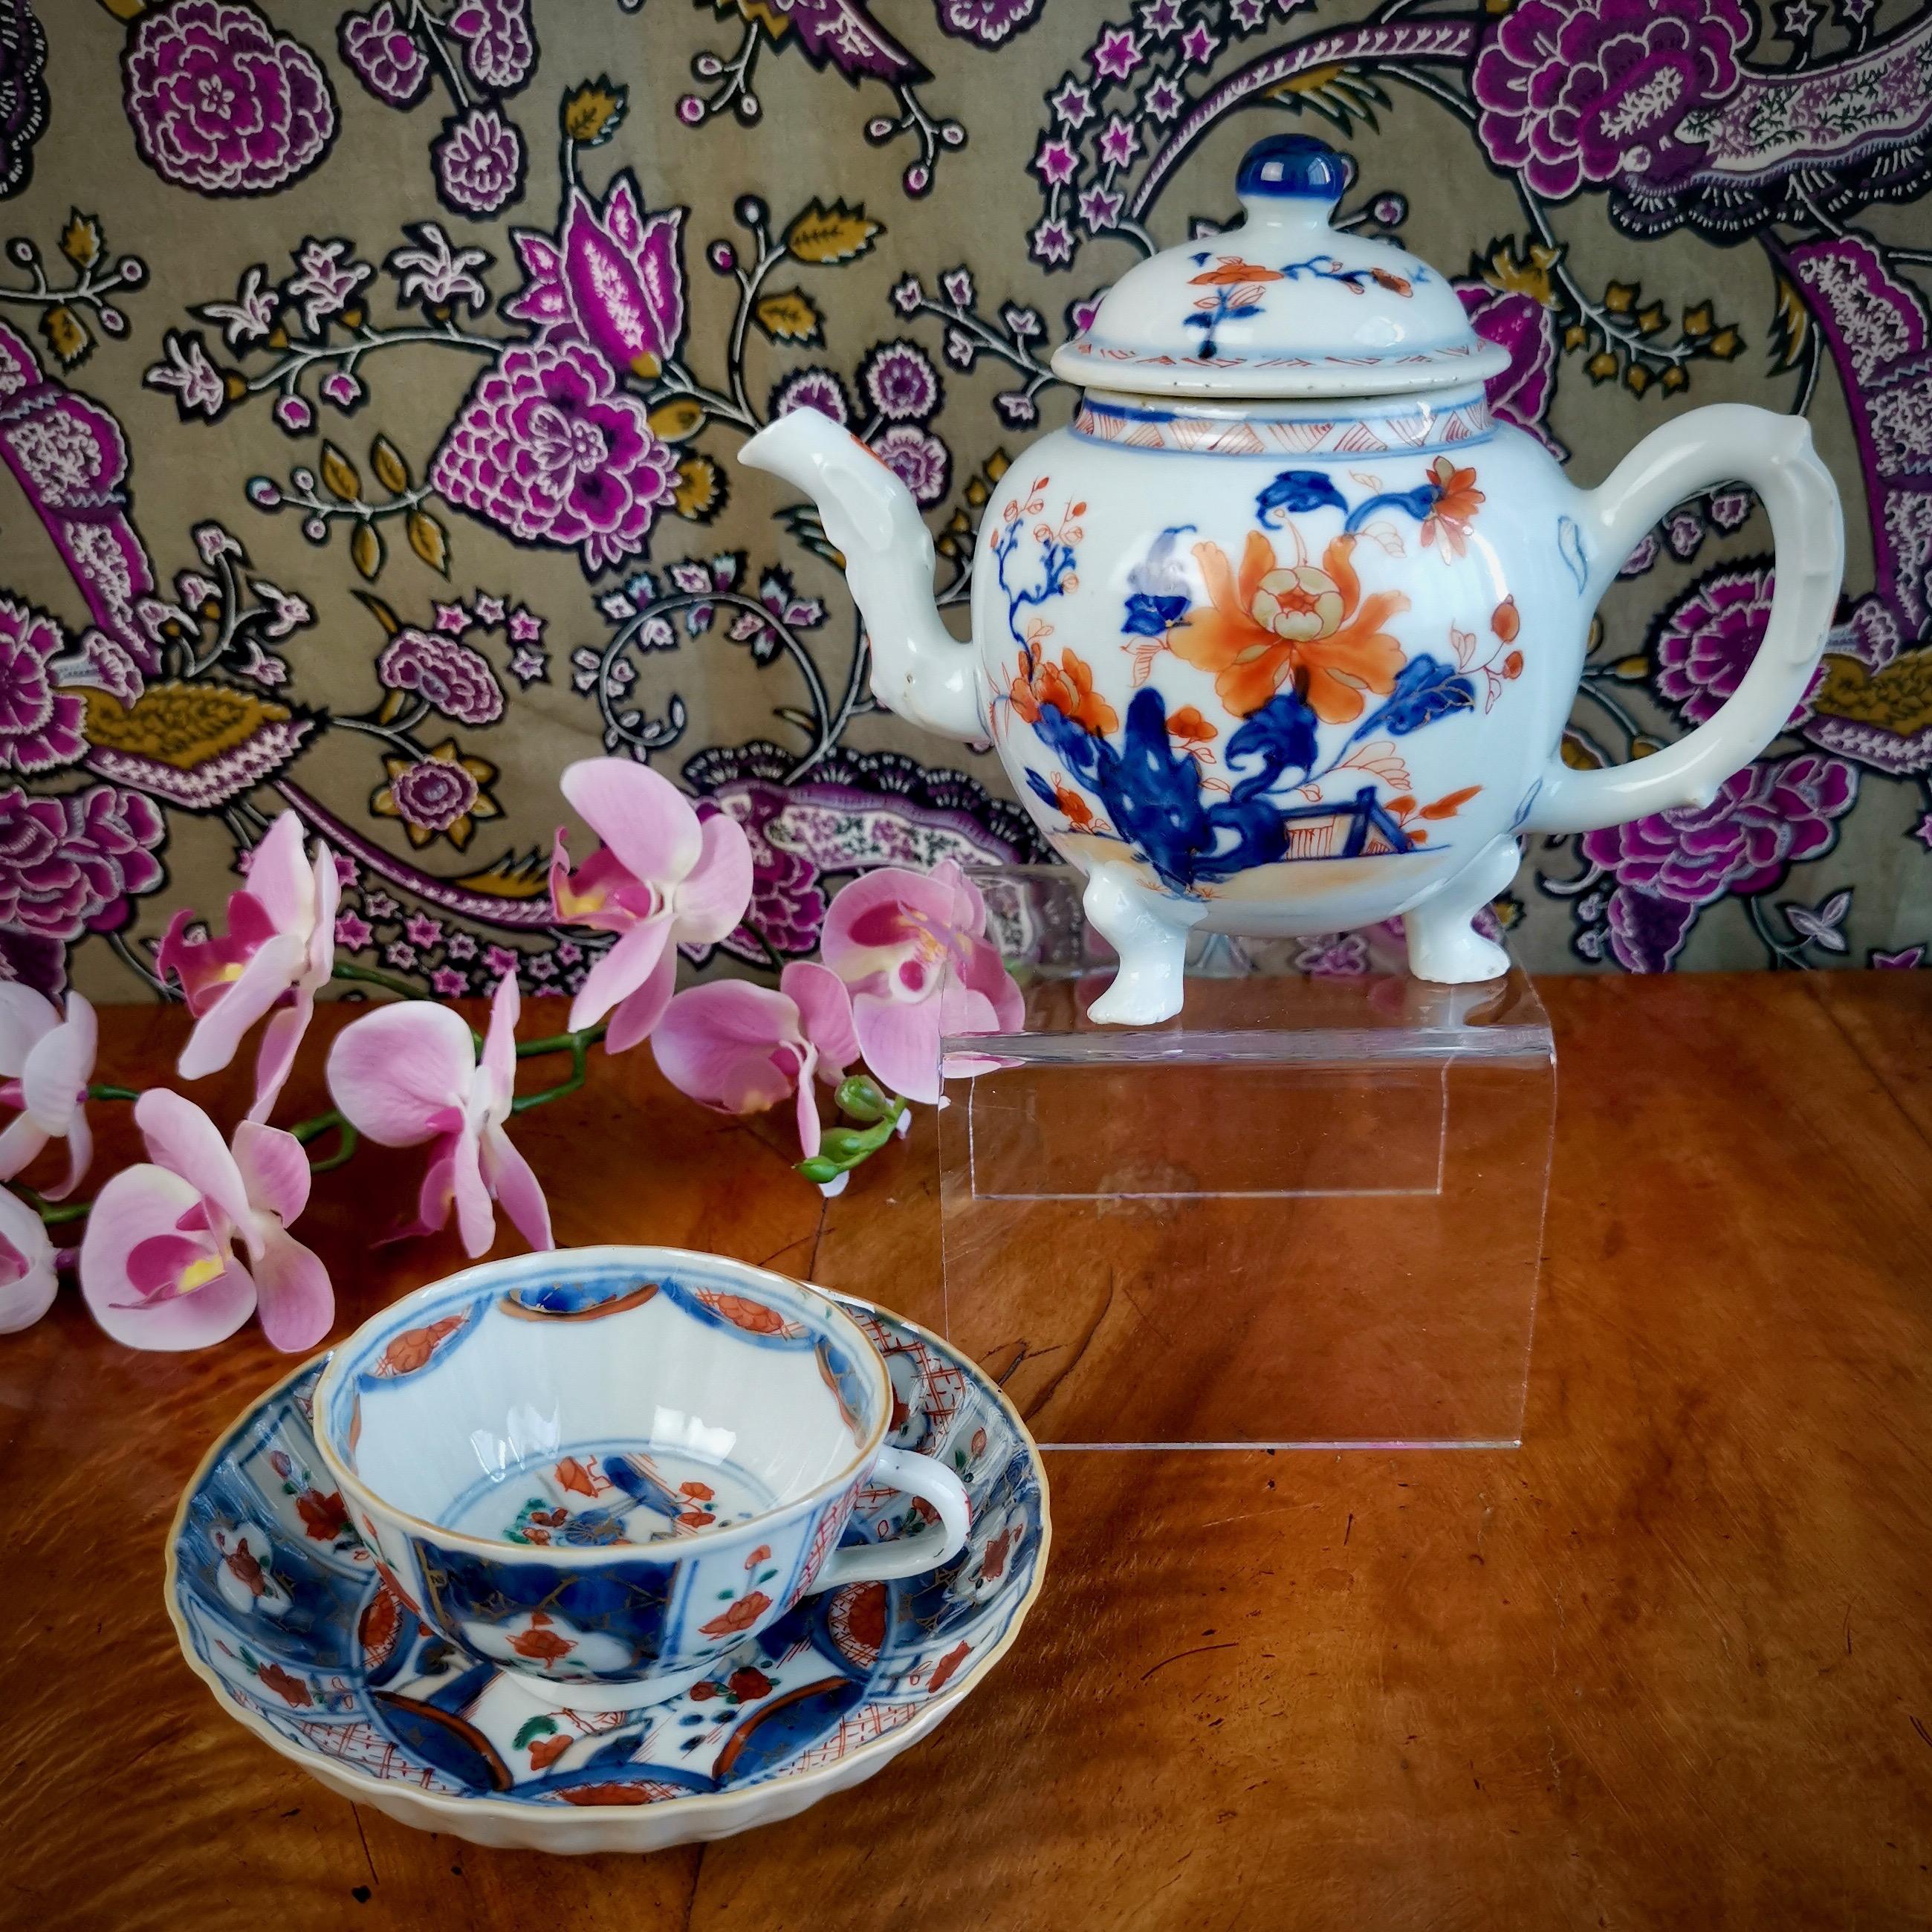 This is a beautiful little teapot made in China for export to the West in the Qianlong period, circa 1750.

The teapot is potted in thick greyish porcelain with shiny glaze, and was decorated with beautiful Japanese-style imari peonies in